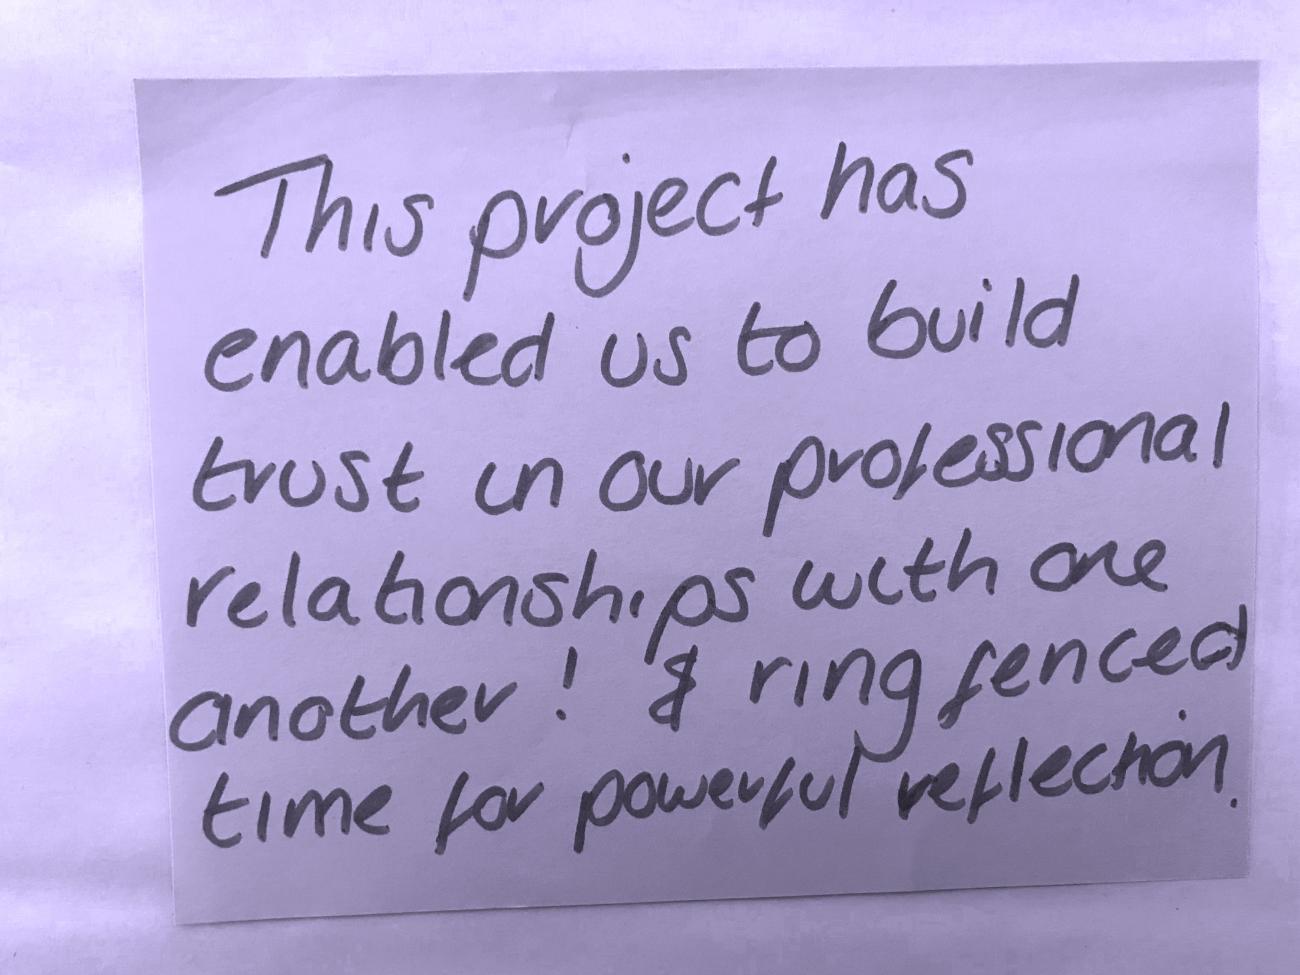 this project has enabled us to build trust in our professional relationships with one another! & ring fenced time for powerful reflection